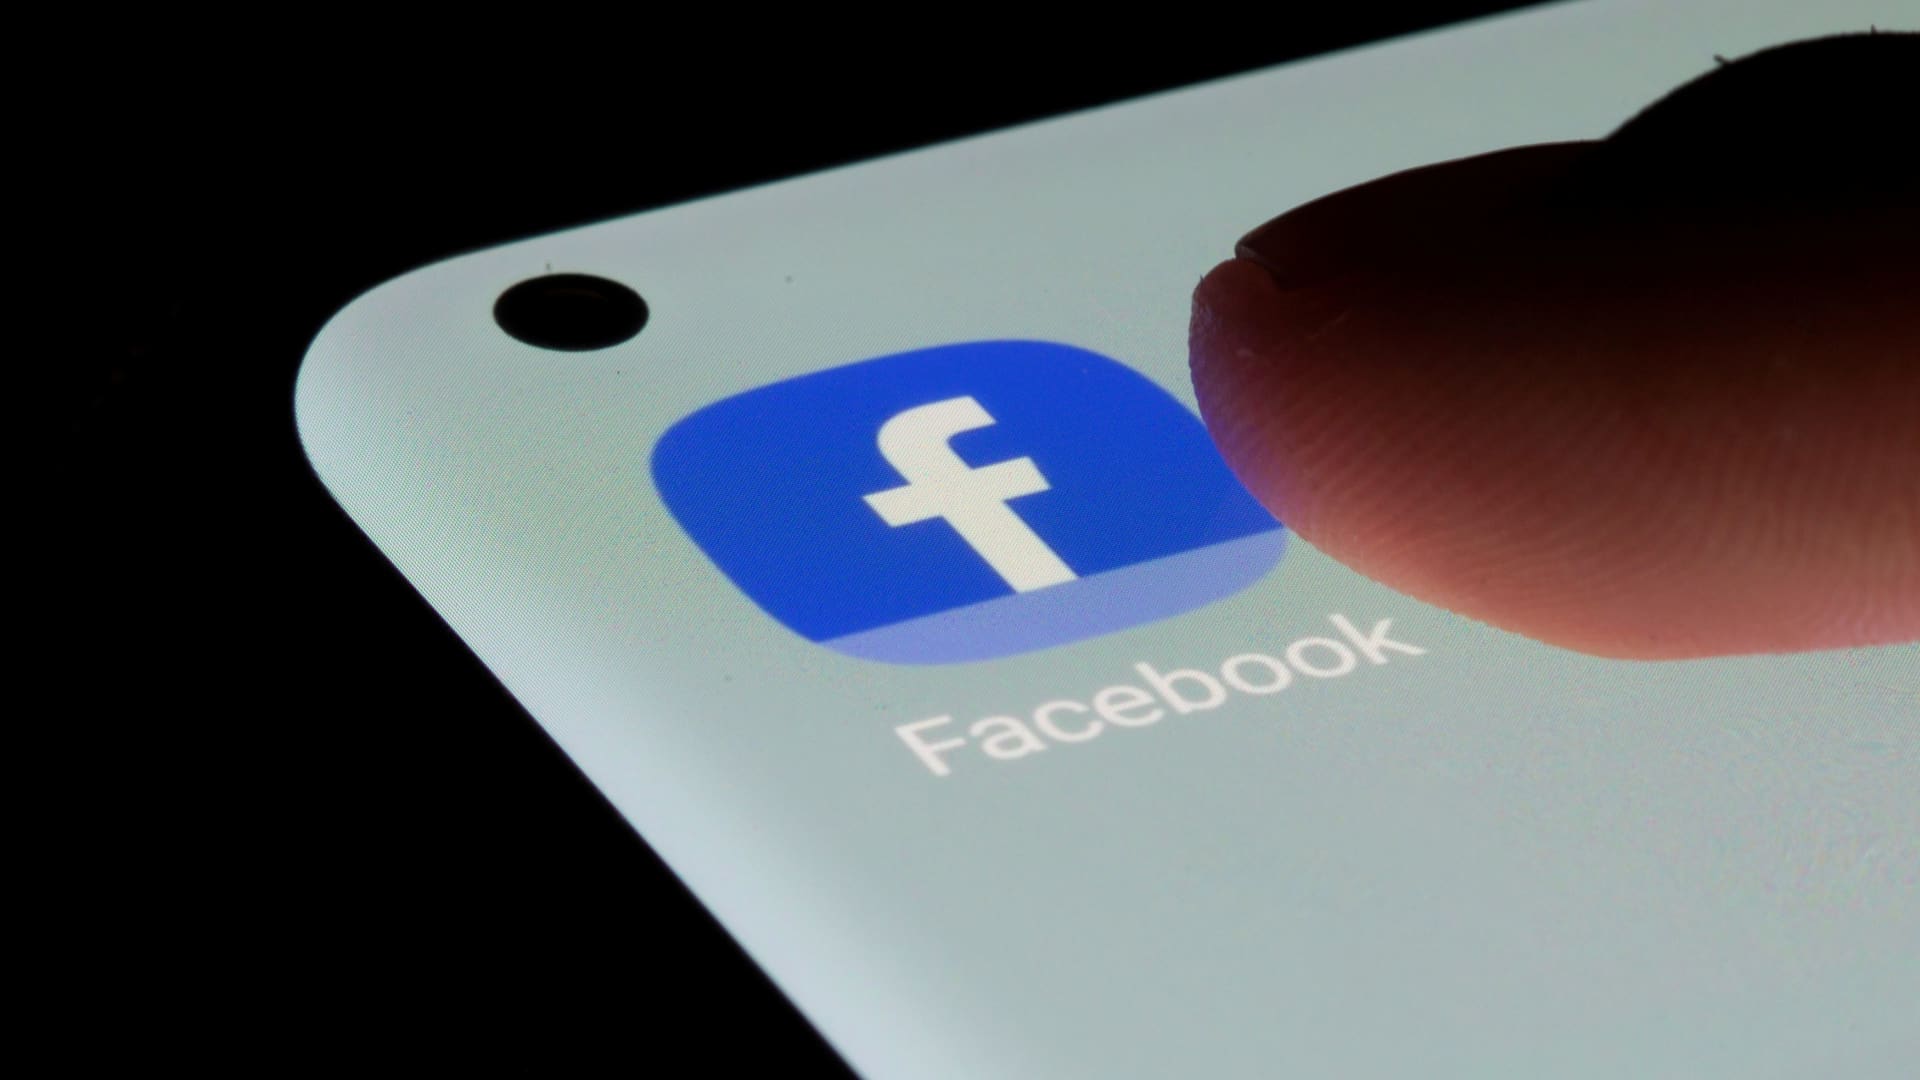 Facebook launches ‘Feeds’ tab that shows users’ newest posts first